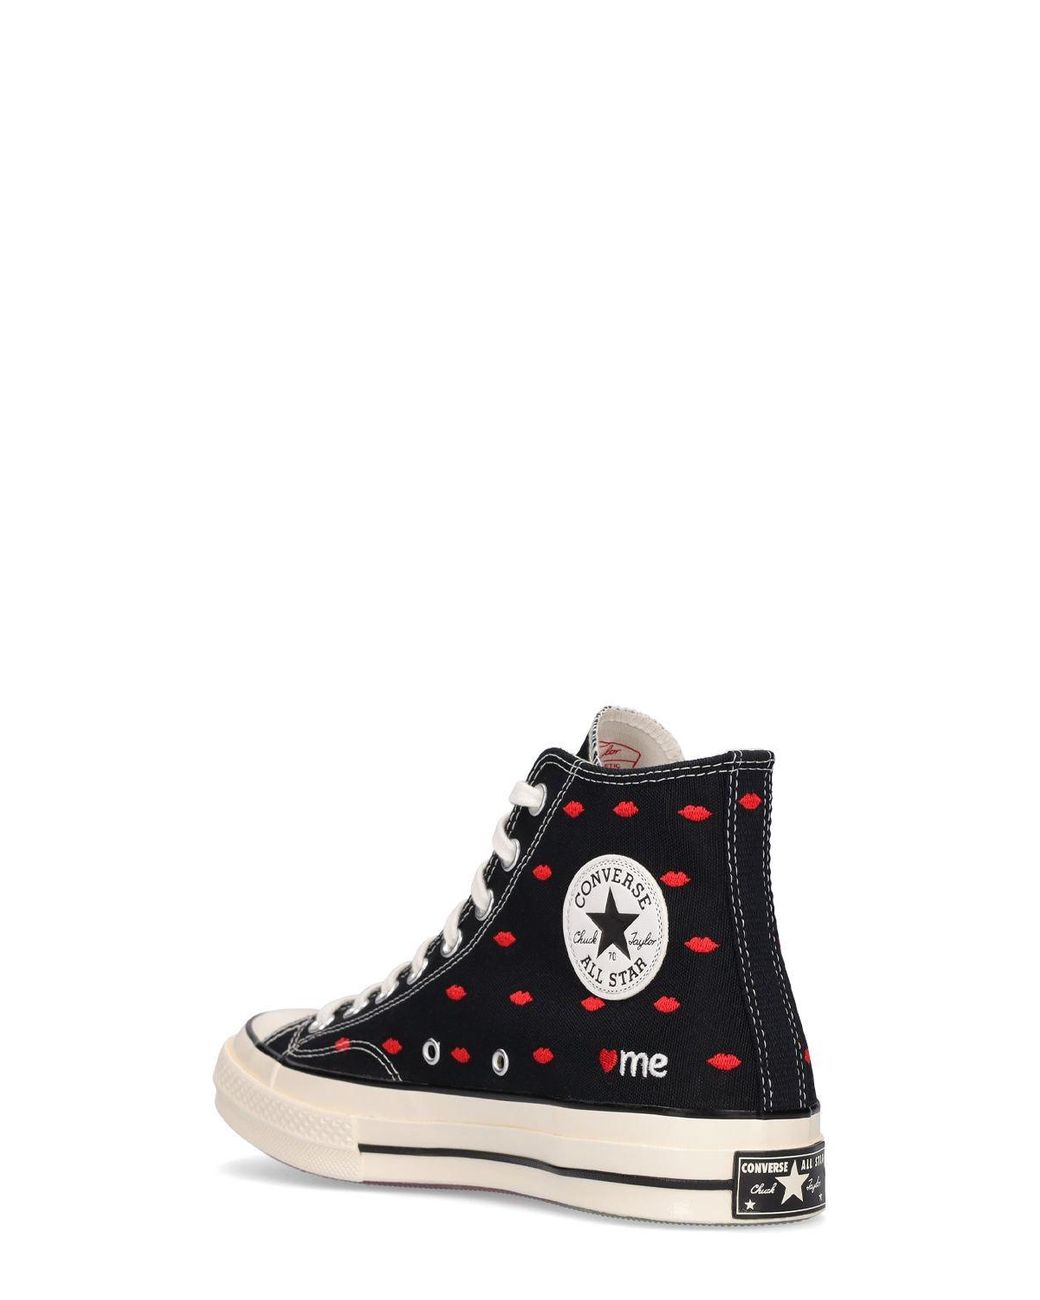 Converse Cotton Chuck 70 Hi Kiss Me Sneakers in Black/Red (Black) for Men |  Lyst